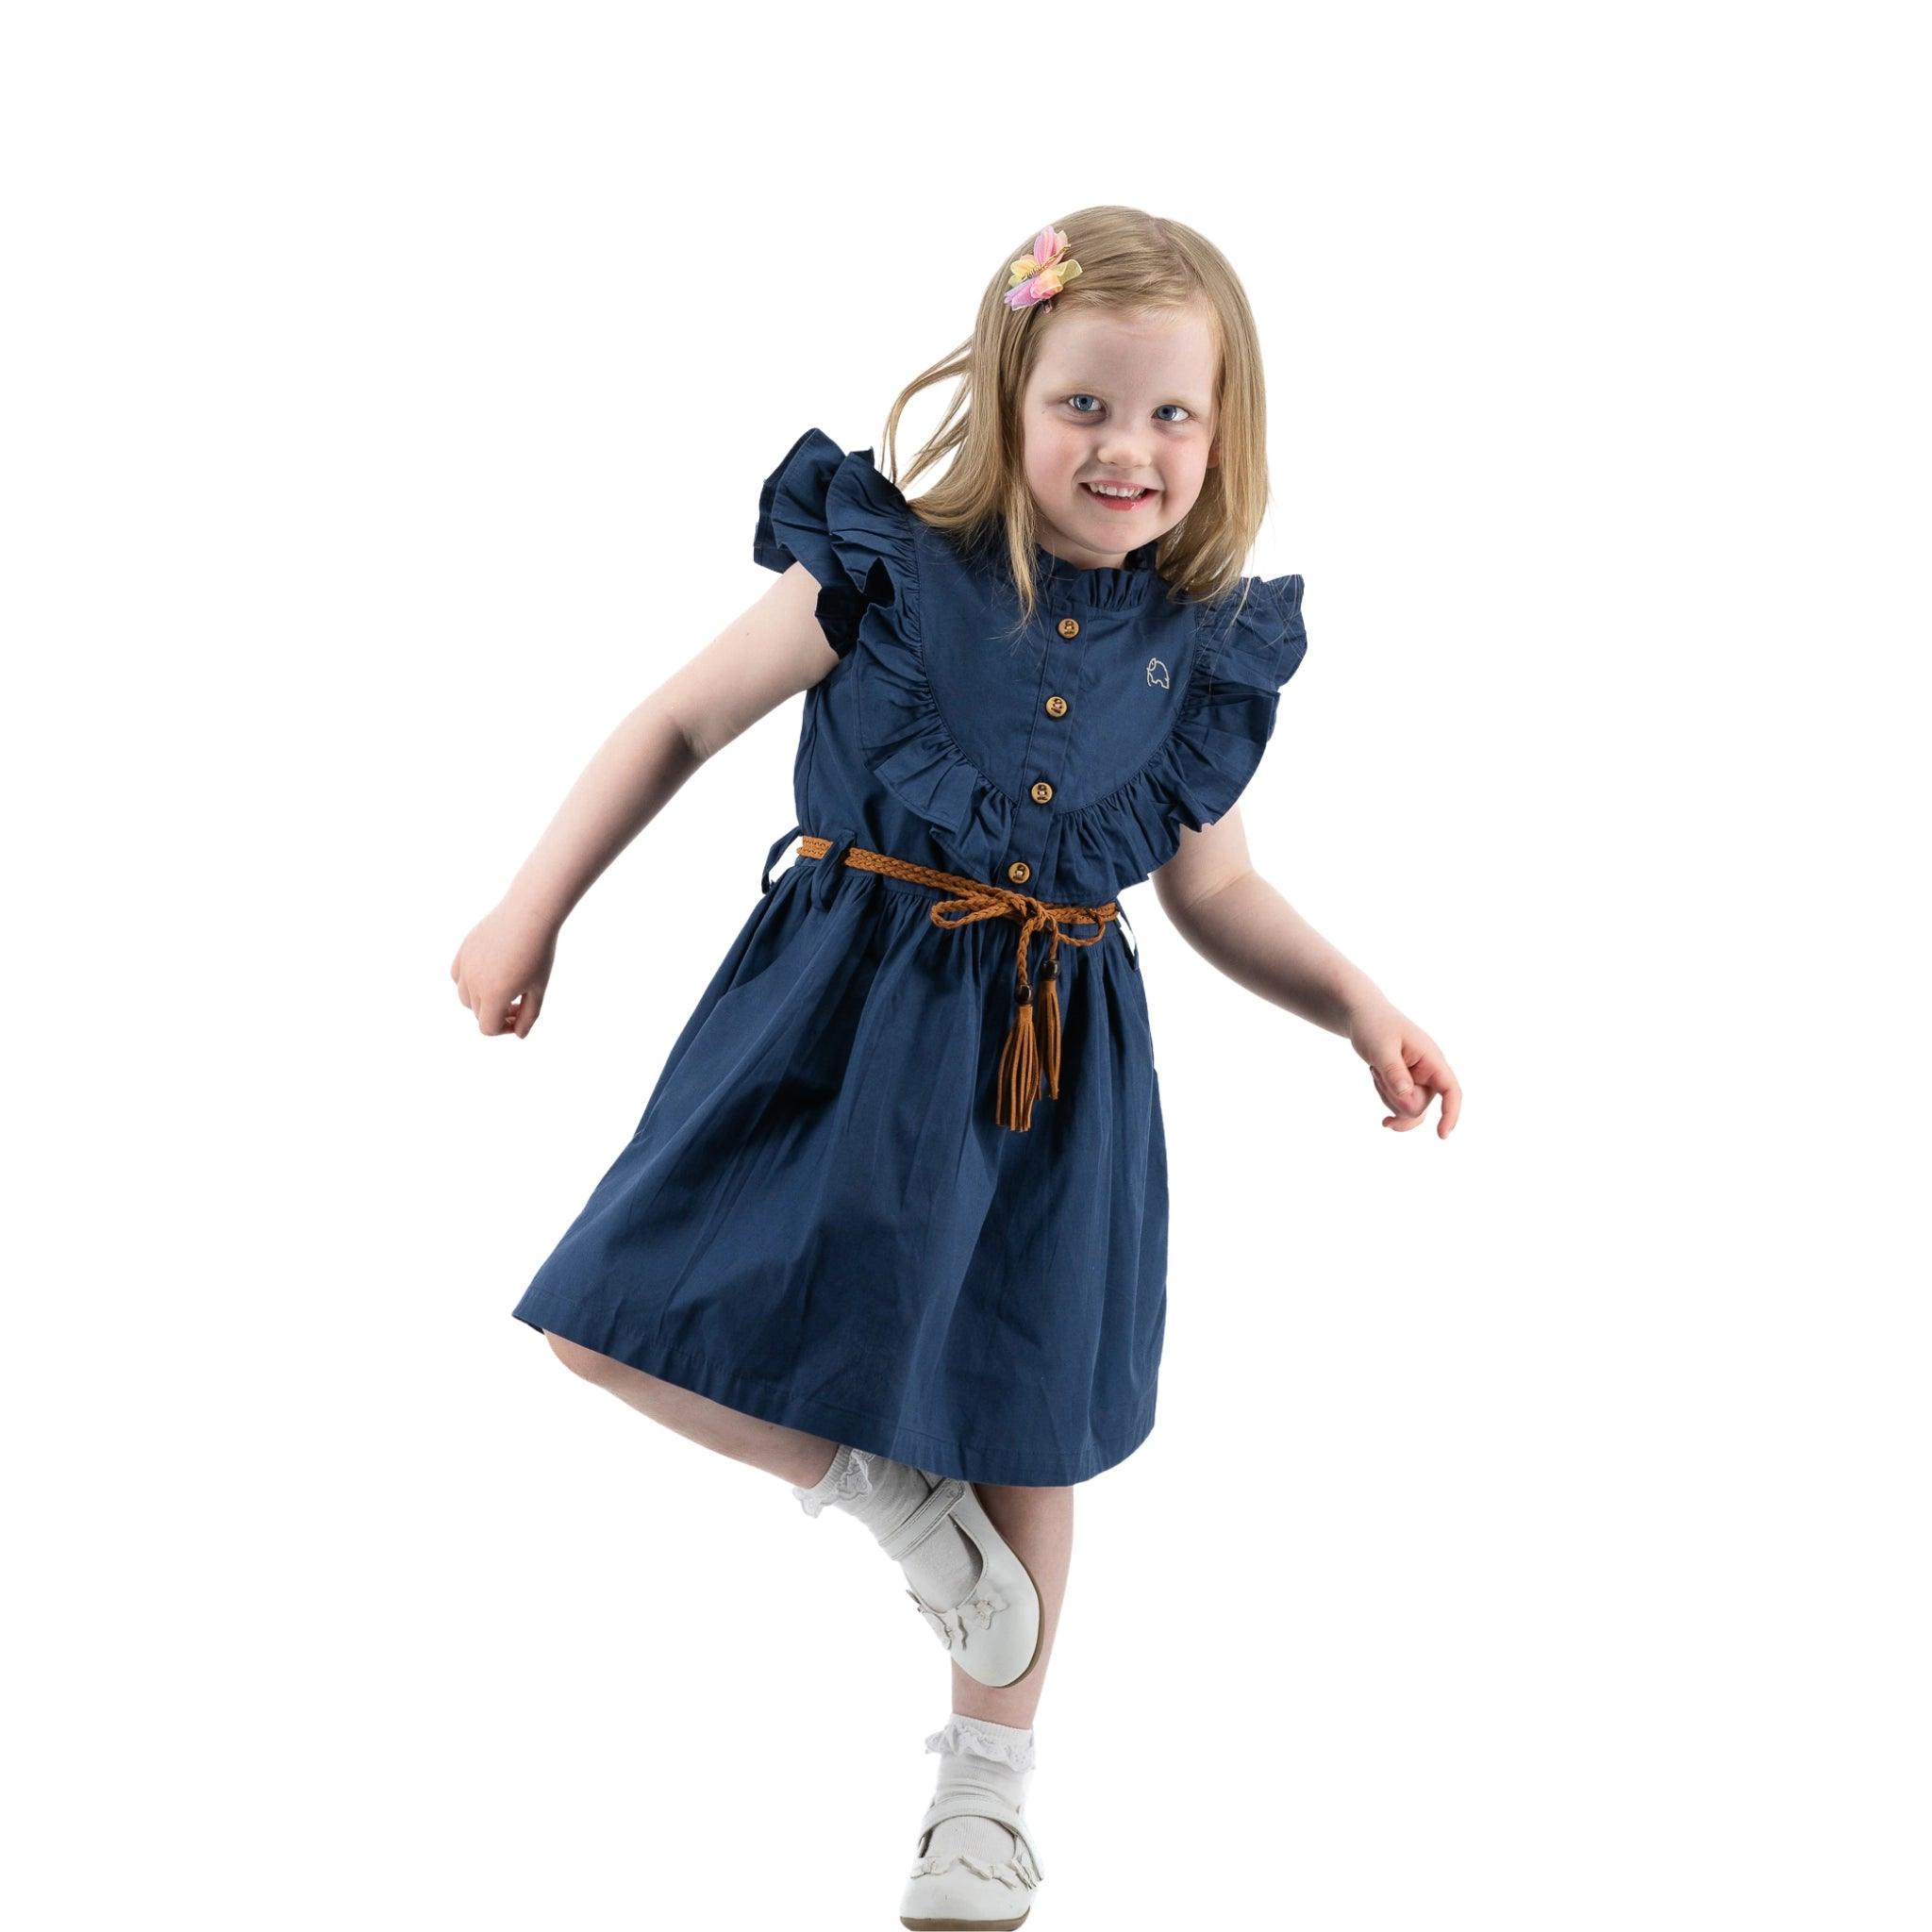 Young girl in a Karee navy blue butterfly sleeve cotton dress and white shoes twirling, with a joyful expression, isolated on white background.